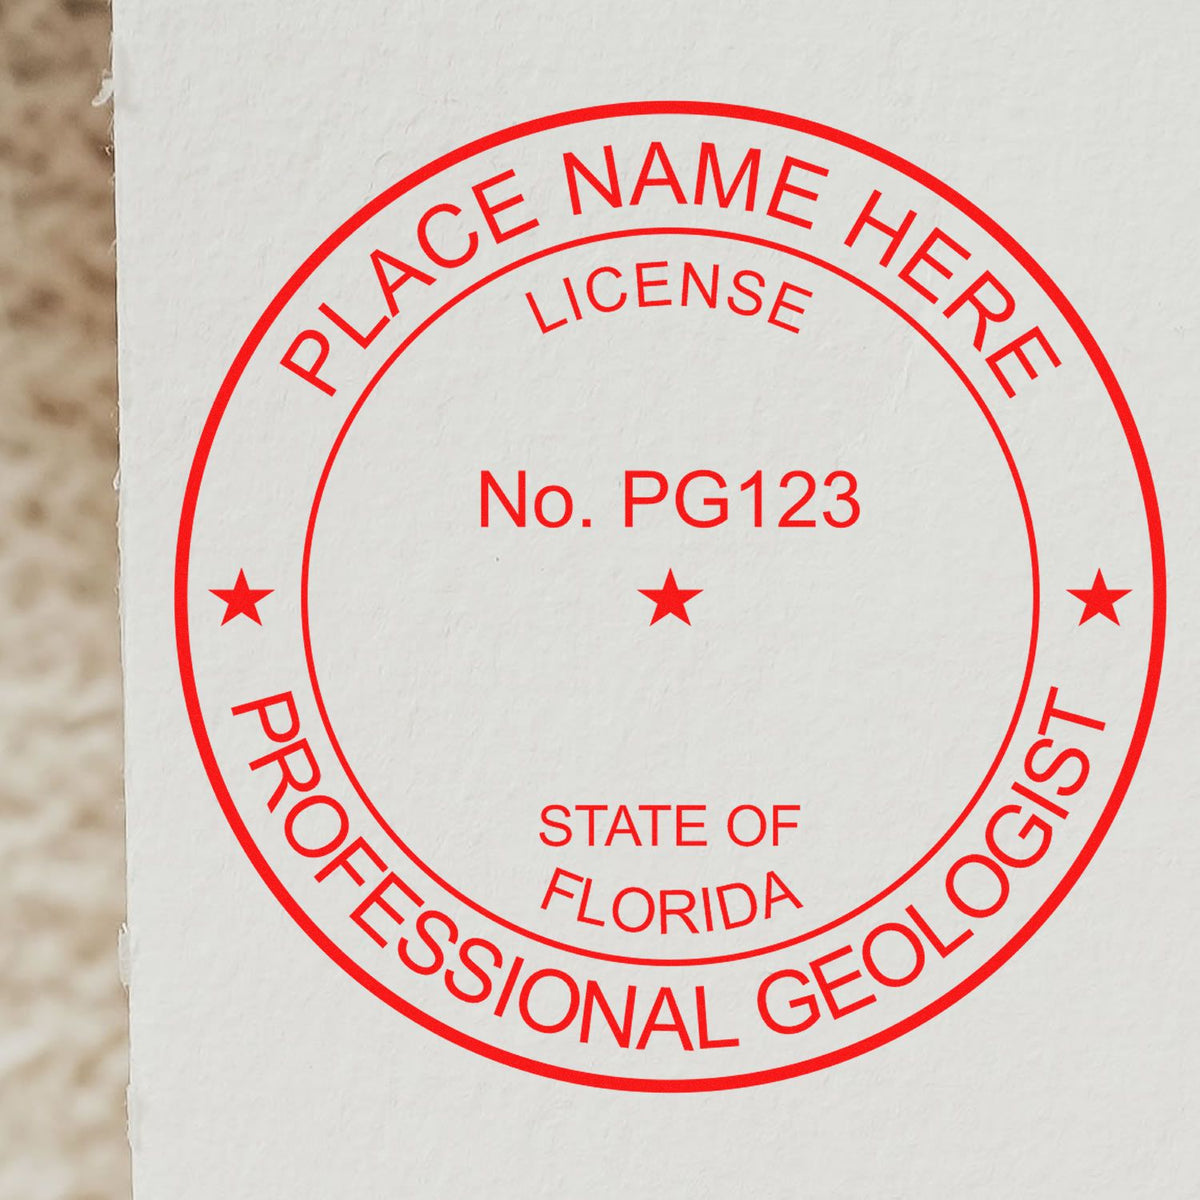 The Premium MaxLight Pre-Inked Florida Geology Stamp stamp impression comes to life with a crisp, detailed image stamped on paper - showcasing true professional quality.